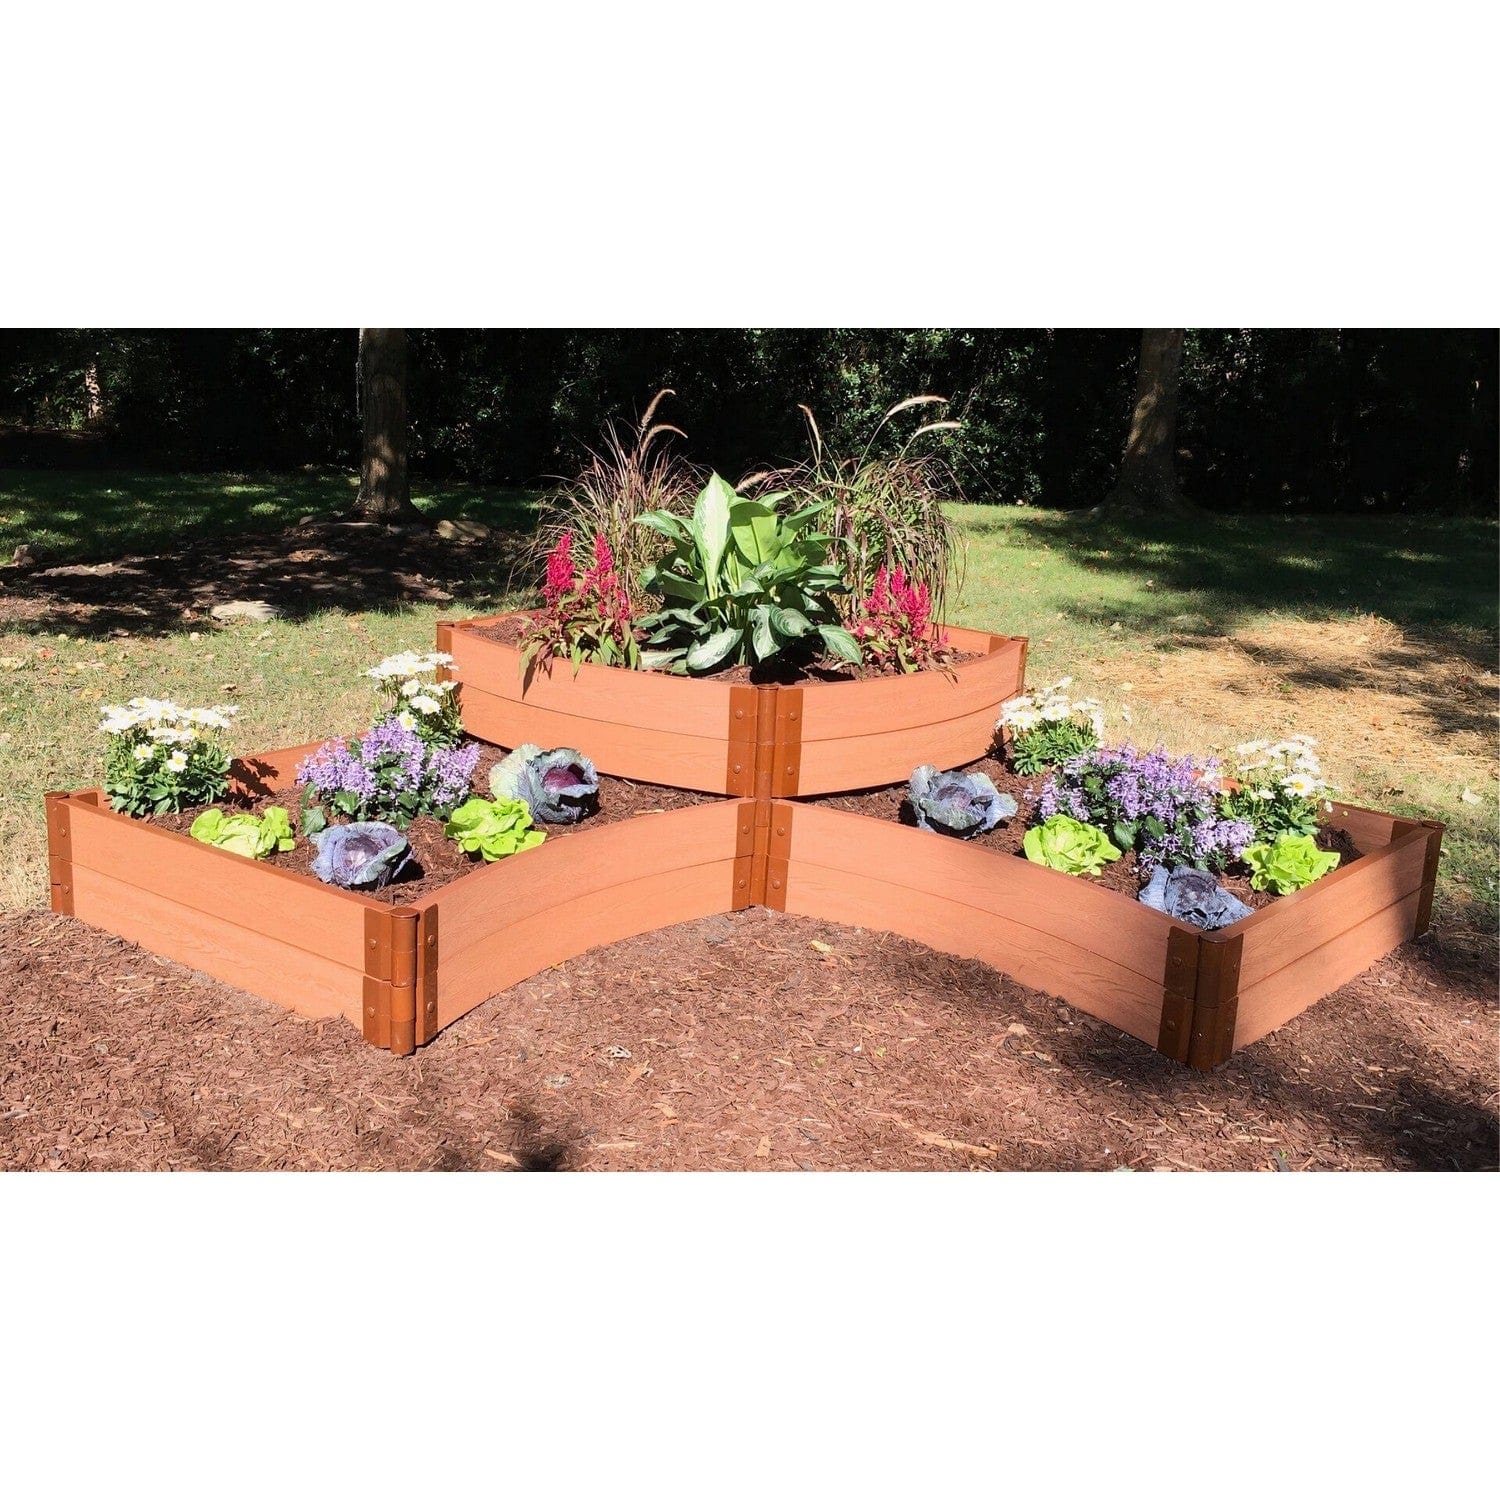 Frame It All Gardening Accessories Frame It All | Tool-Free Teardrop Curved Corner Raised Garden Bed (2-Tier) 8' X 8' X 22" - Weathered Wood - 1" Profile 800004007